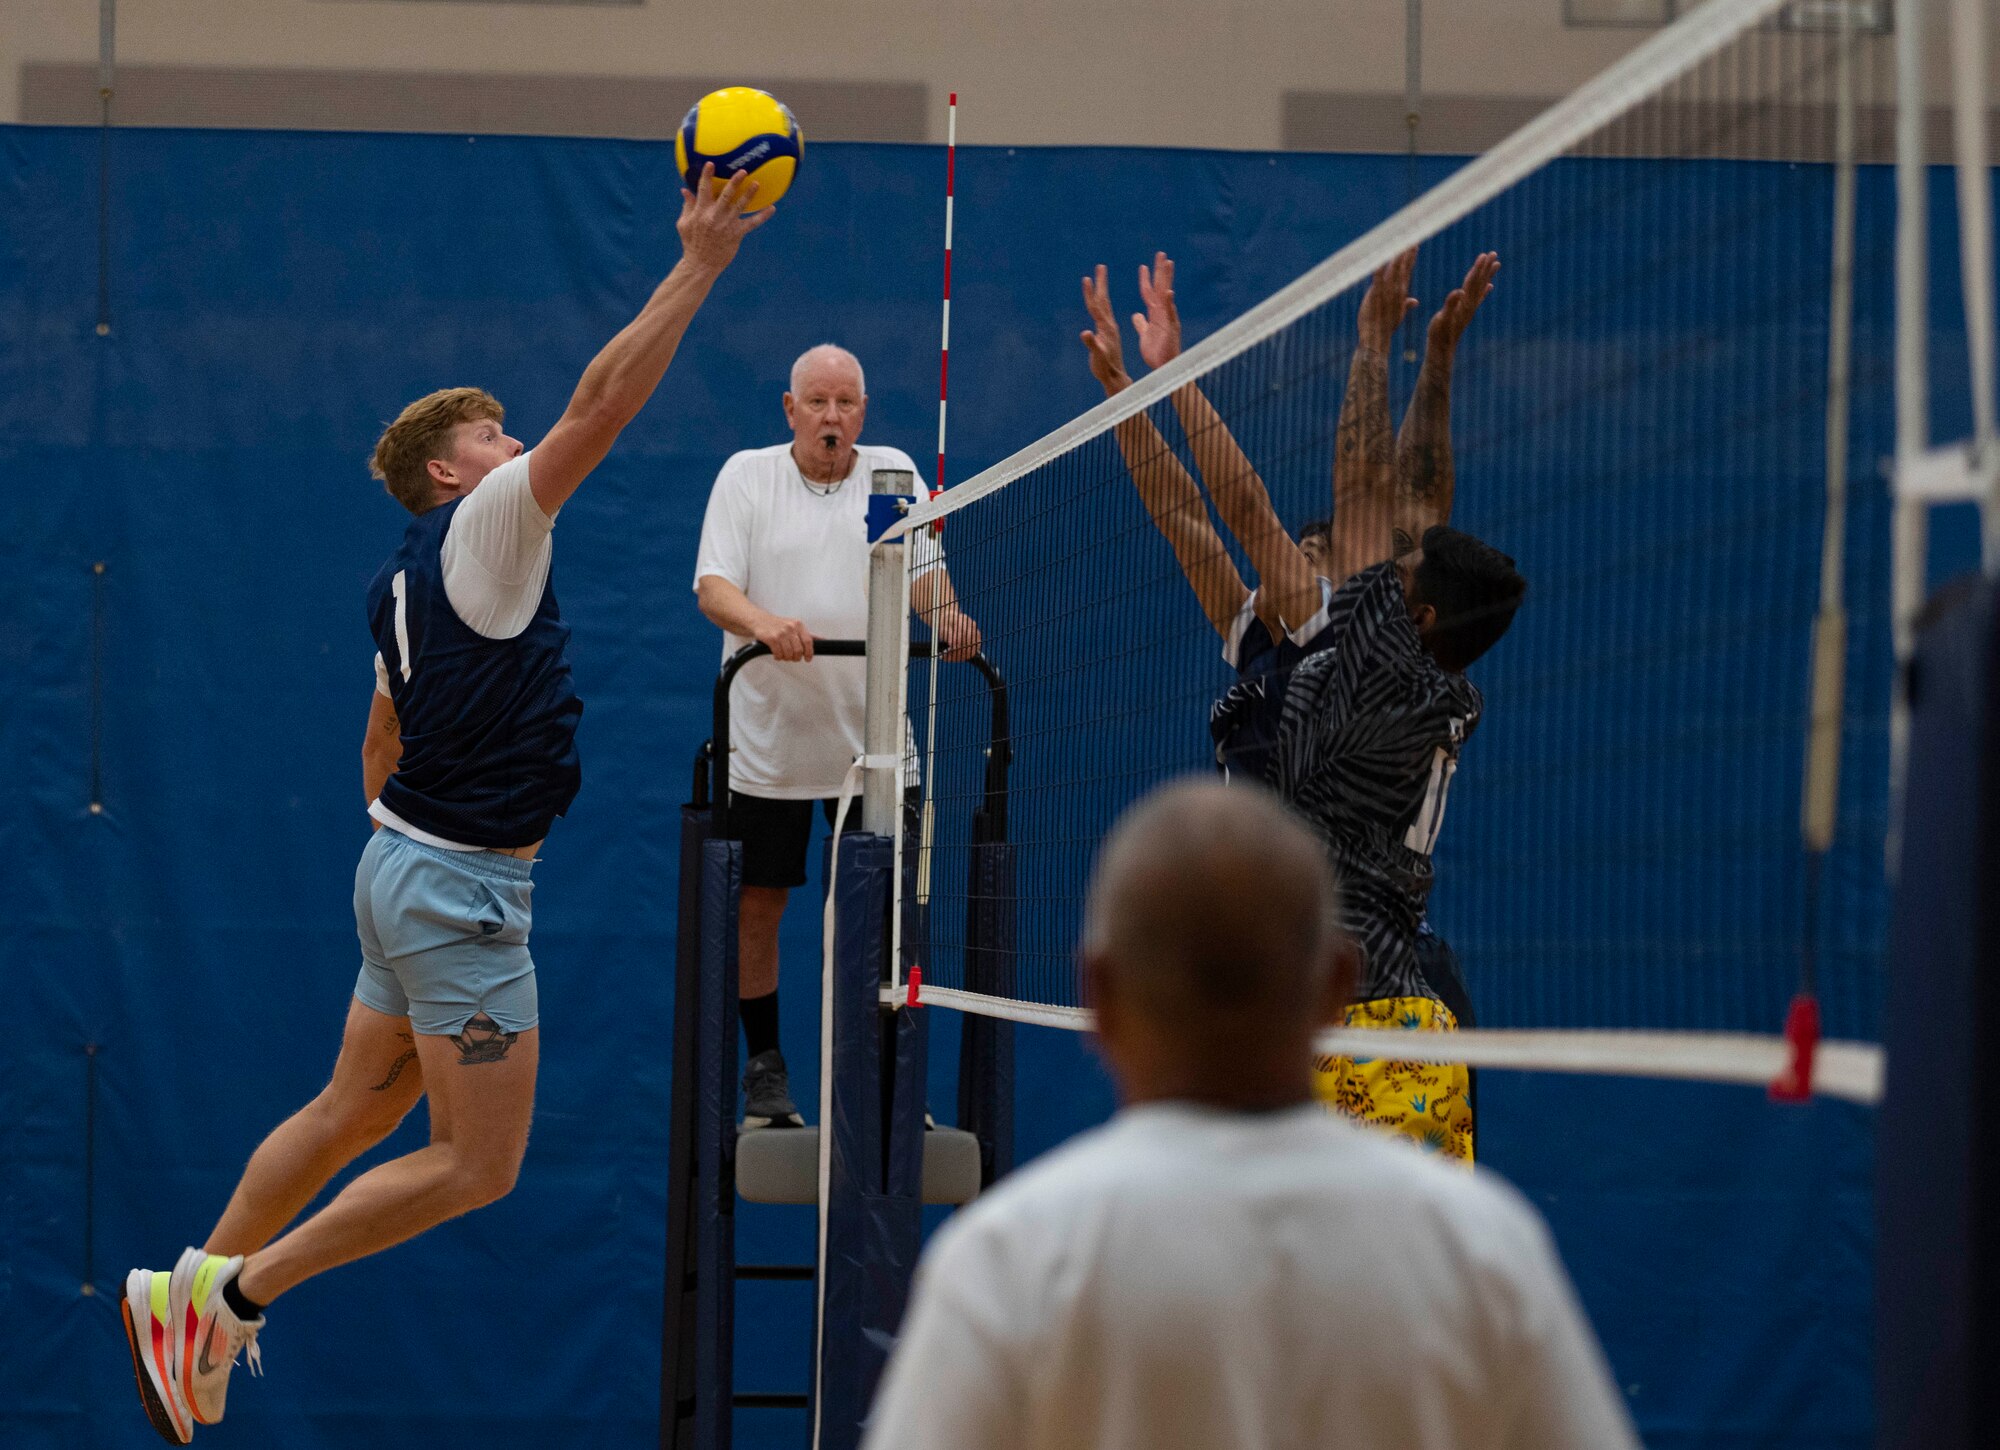 Staff Sgt. Joshua Bohling, a member of the Civil Engineer Squadron’s intramural volleyball team, hits the ball during the championship game on Andersen Air Force Base, Guam, Oct. 26, 2023. Andersen’s intramural volleyball league ended in a climactic final game between the Security Forces Squadron and CES. The game ended with SFS being named the champions. (U.S. Air Force photo by Airman 1st Class Spencer Perkins)